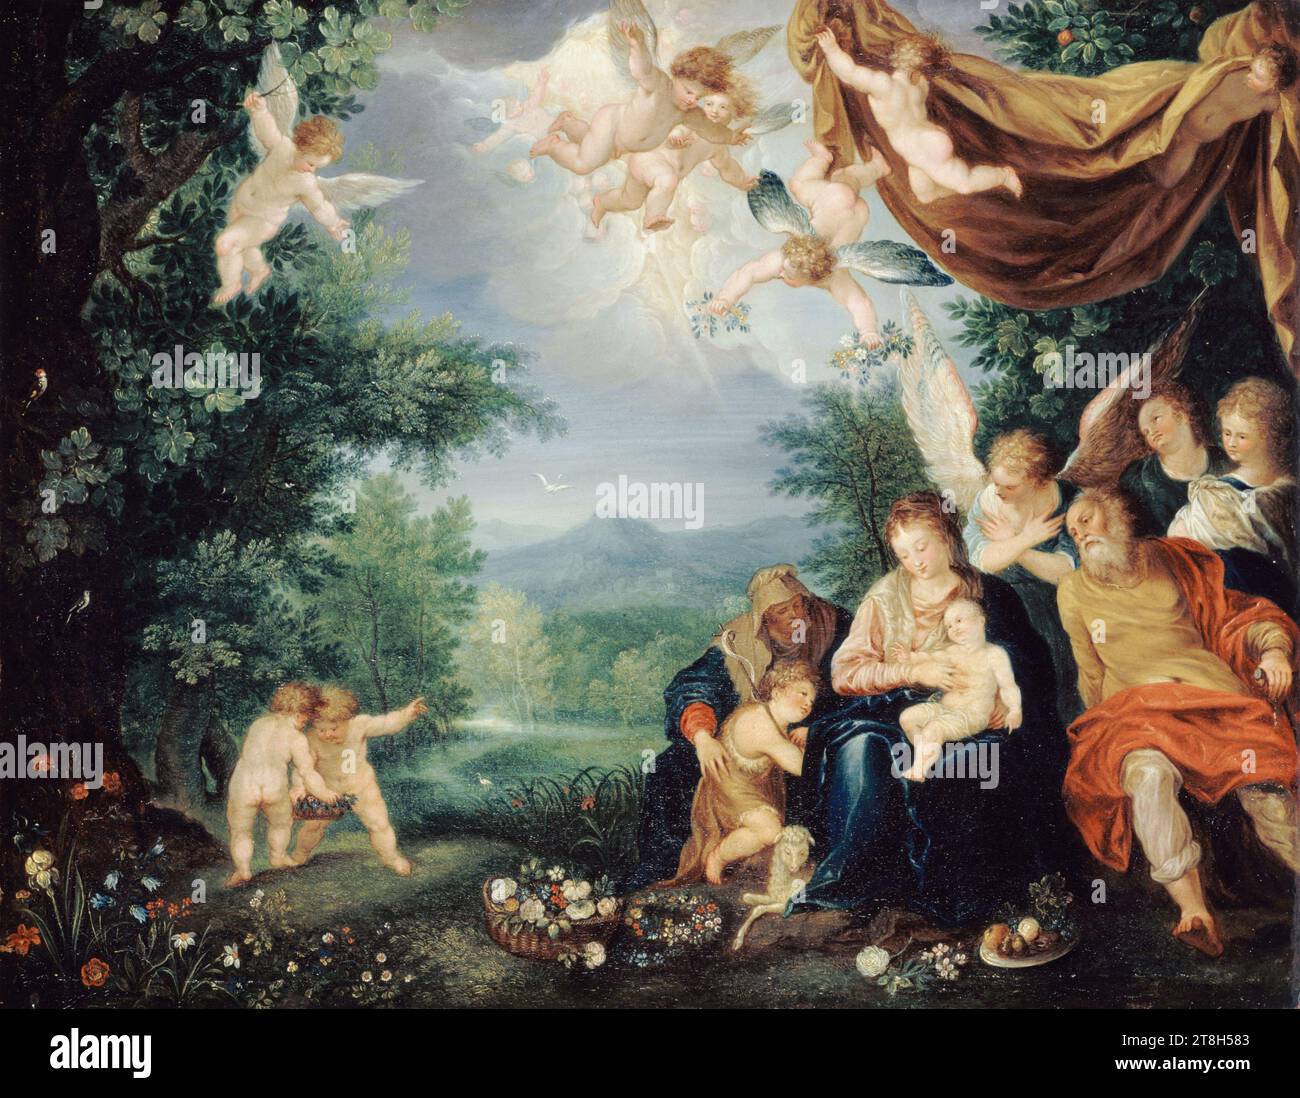 The Rest of the Holy Family during the Flight into Egypt, Painter, Brueghel, Jan (known as Brueghel de Velours or the Elder), Model's author, Rottenhammer, Johann, Model's author, Array, 16th-17th century, Painting, Table, Oil painting, Copper, Antwerp (Antwerpen), Dimensions - Work: Height: 26. 8 cm, Width: 34.5 cm, Dimensions - Frame:, Height: 45.5 cm, Width: 53.4 cm, Depth: 8 cm Stock Photo